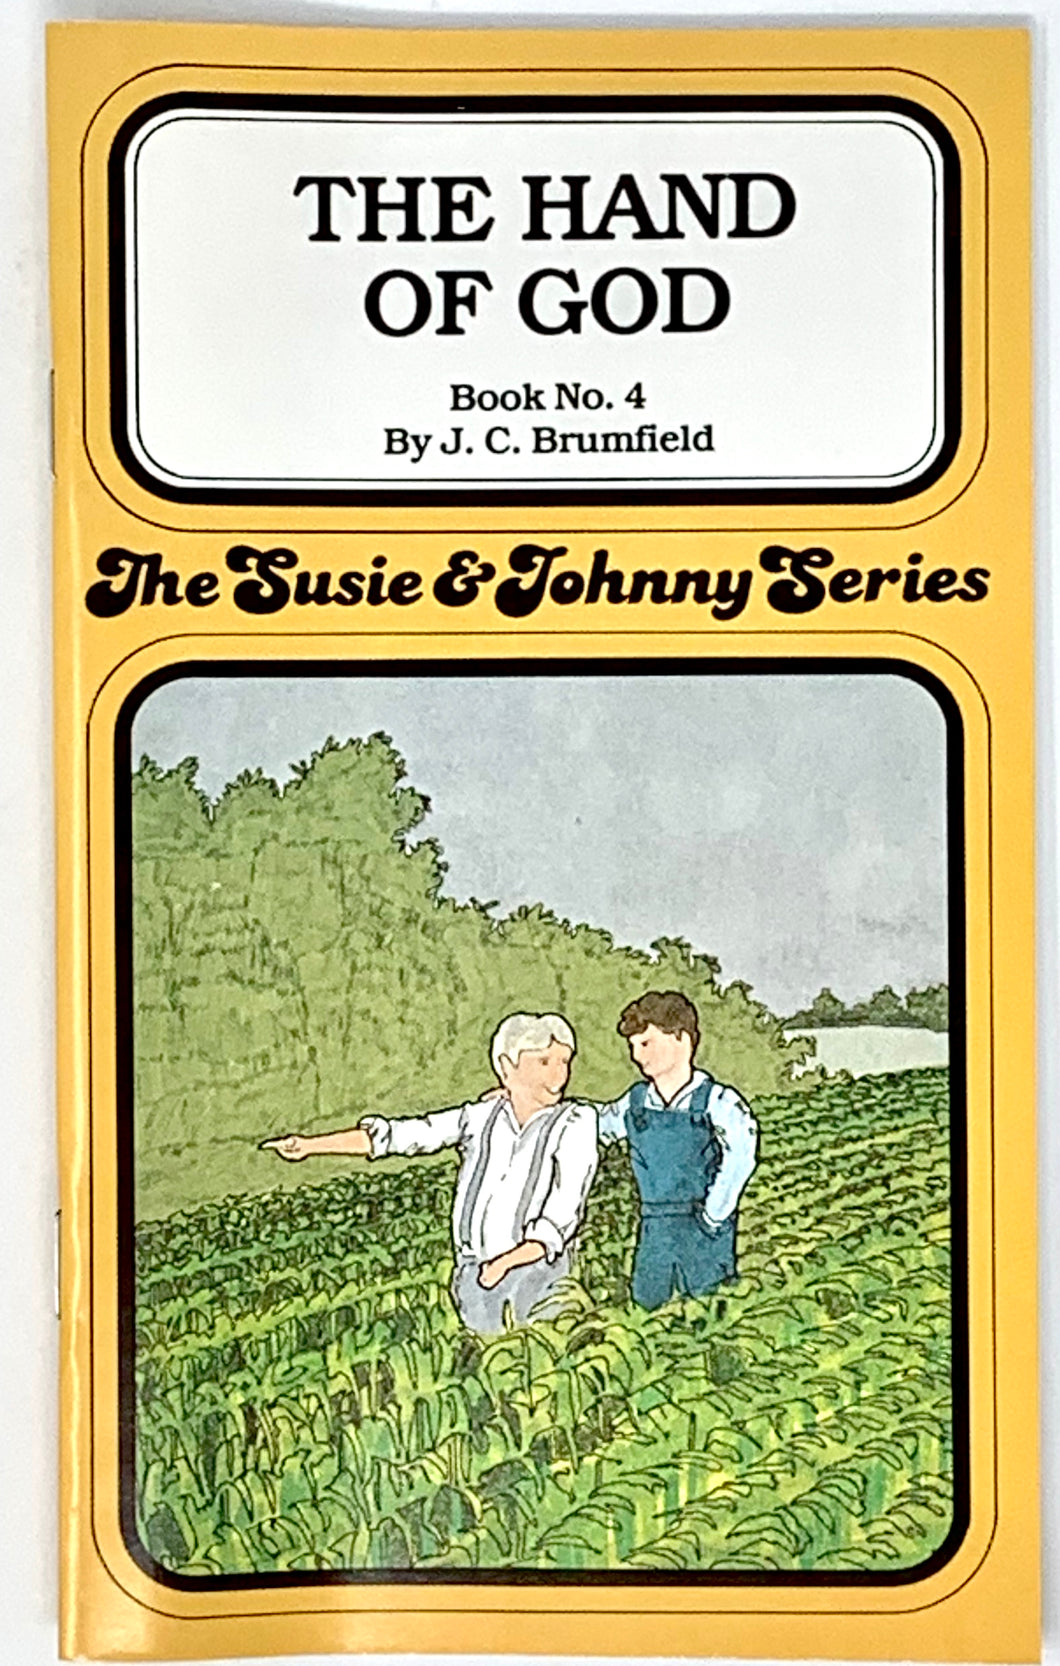 THE SUSIE & JOHNNY SERIES BOOK #4 